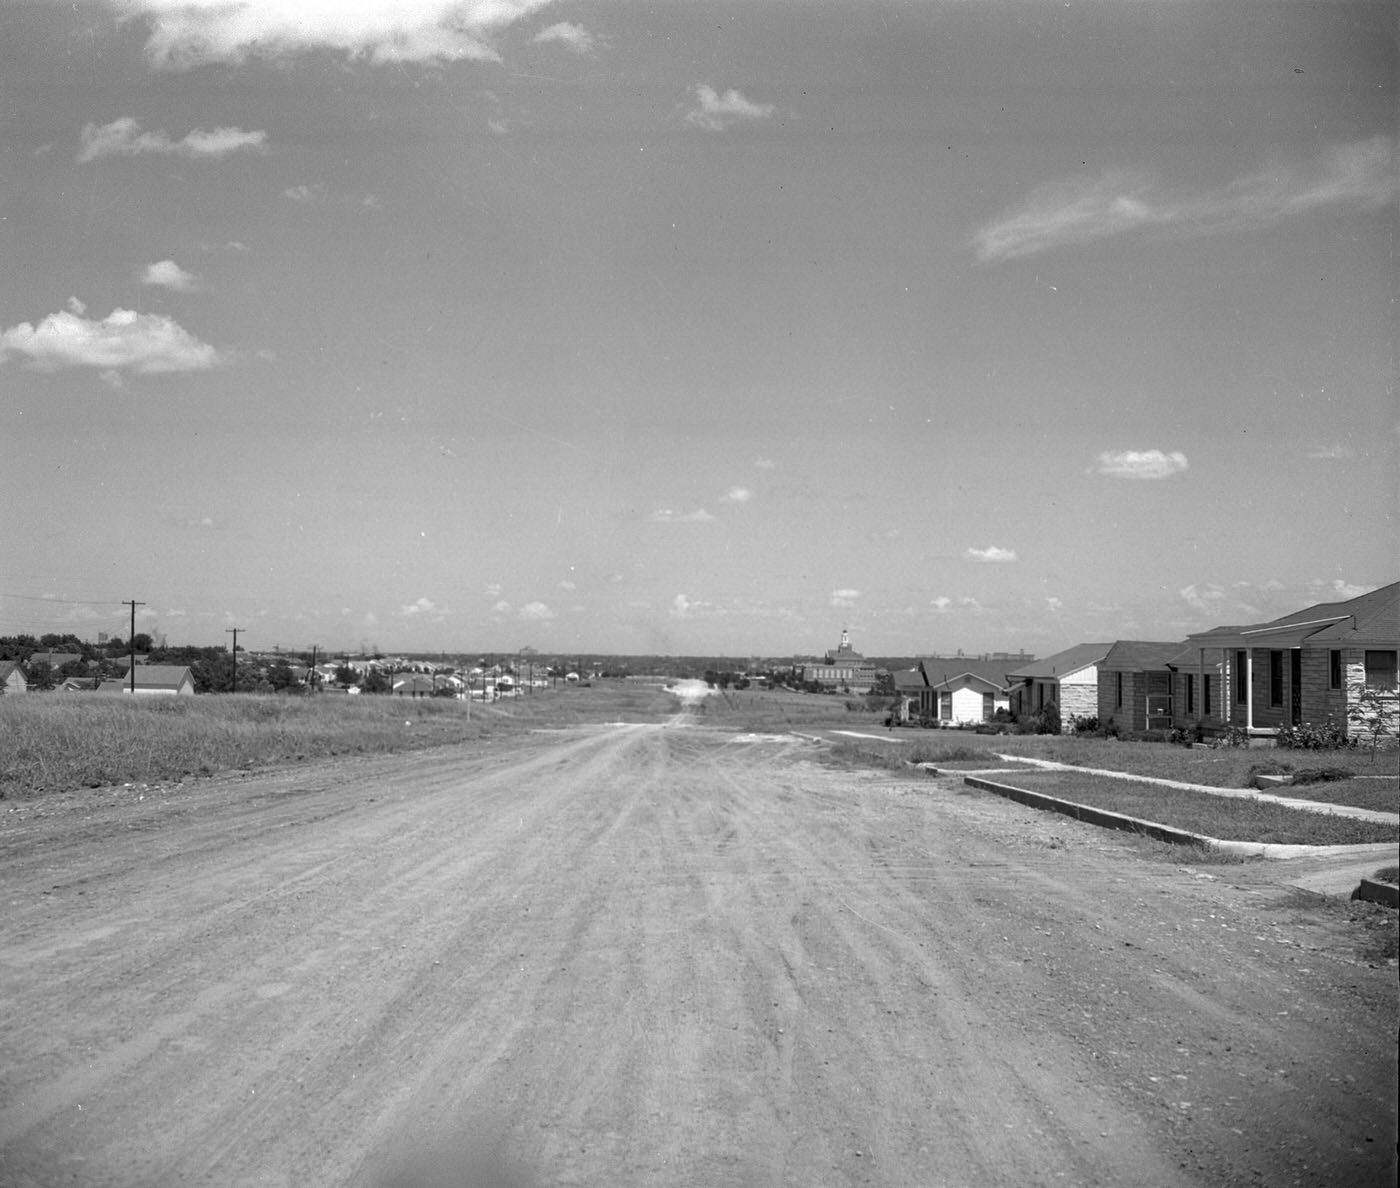 East-West expressway construction, 1940